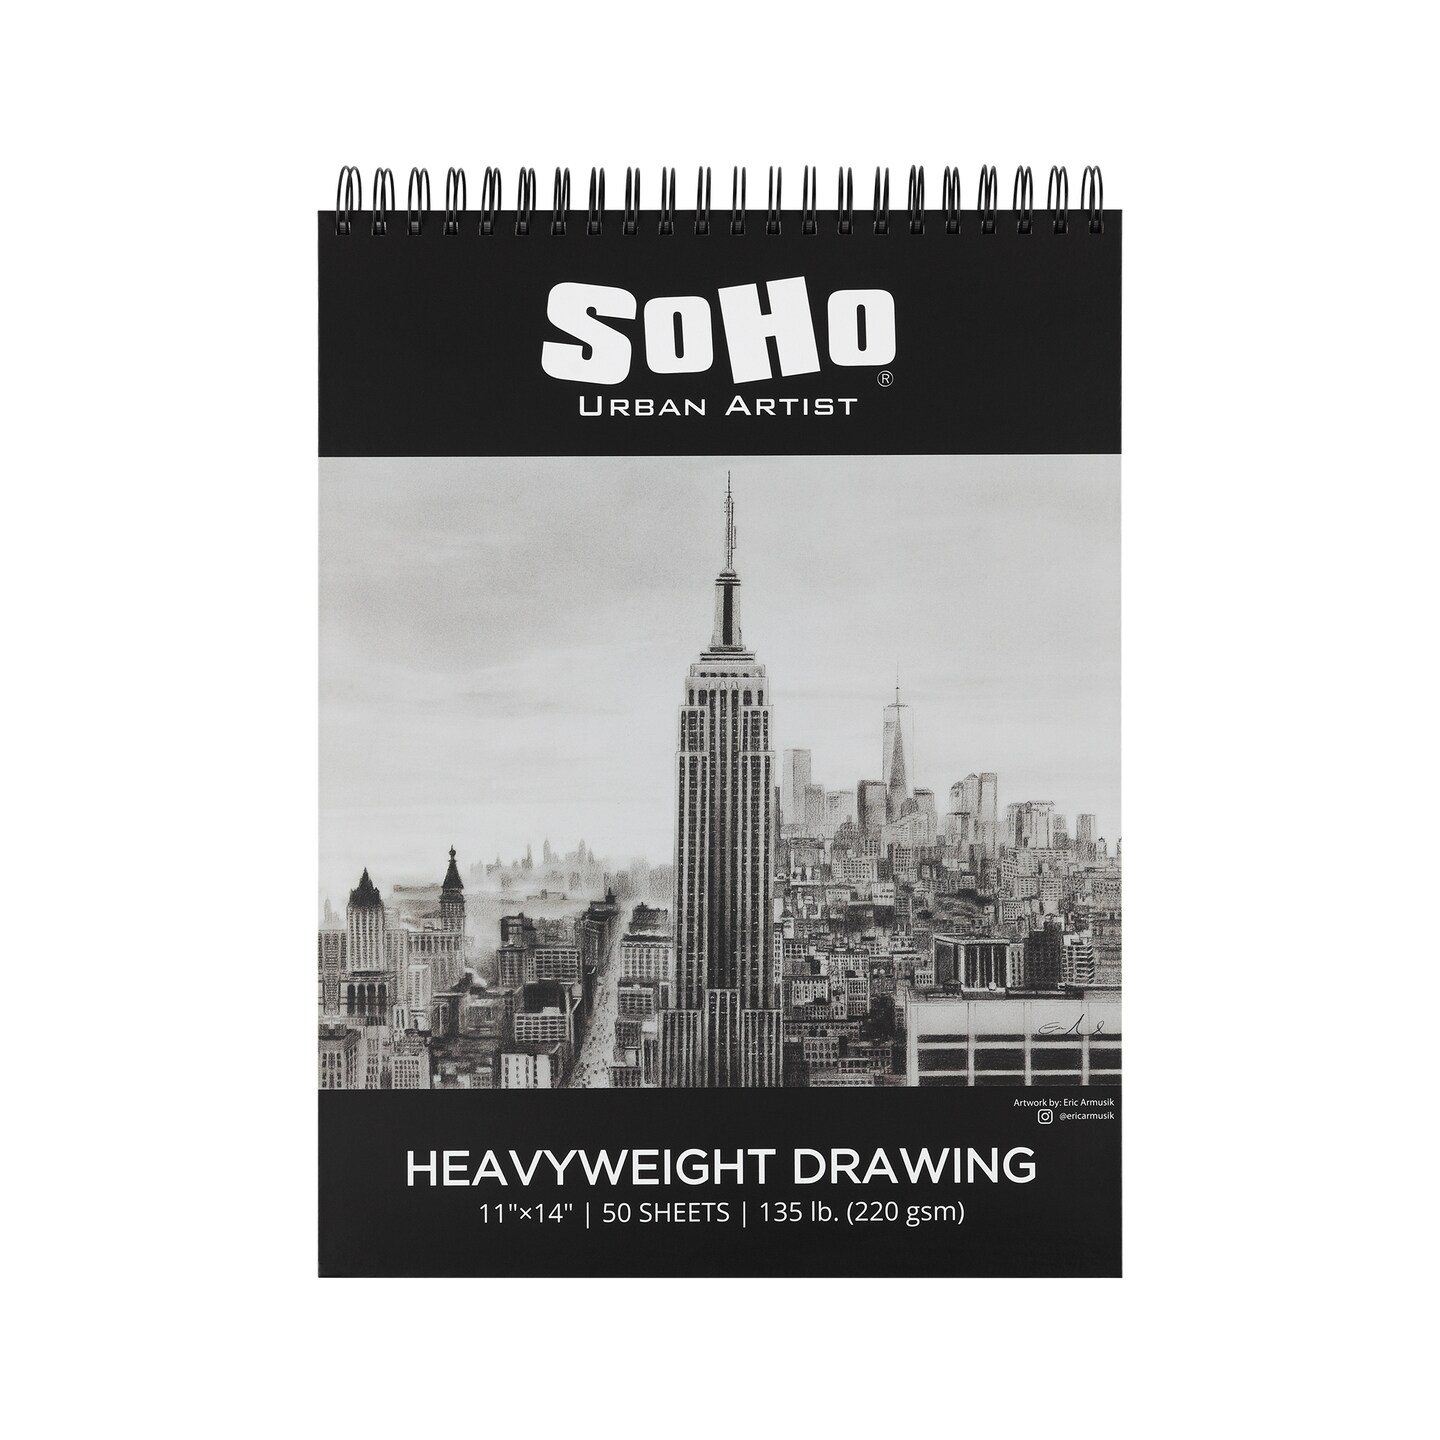 SoHo Urban Artist Hardcover Drawing Pad - 135 lb. (220gsm) Drawing Paper Pads for Artists, Travel, Illustrations, &#x26; More! - Single